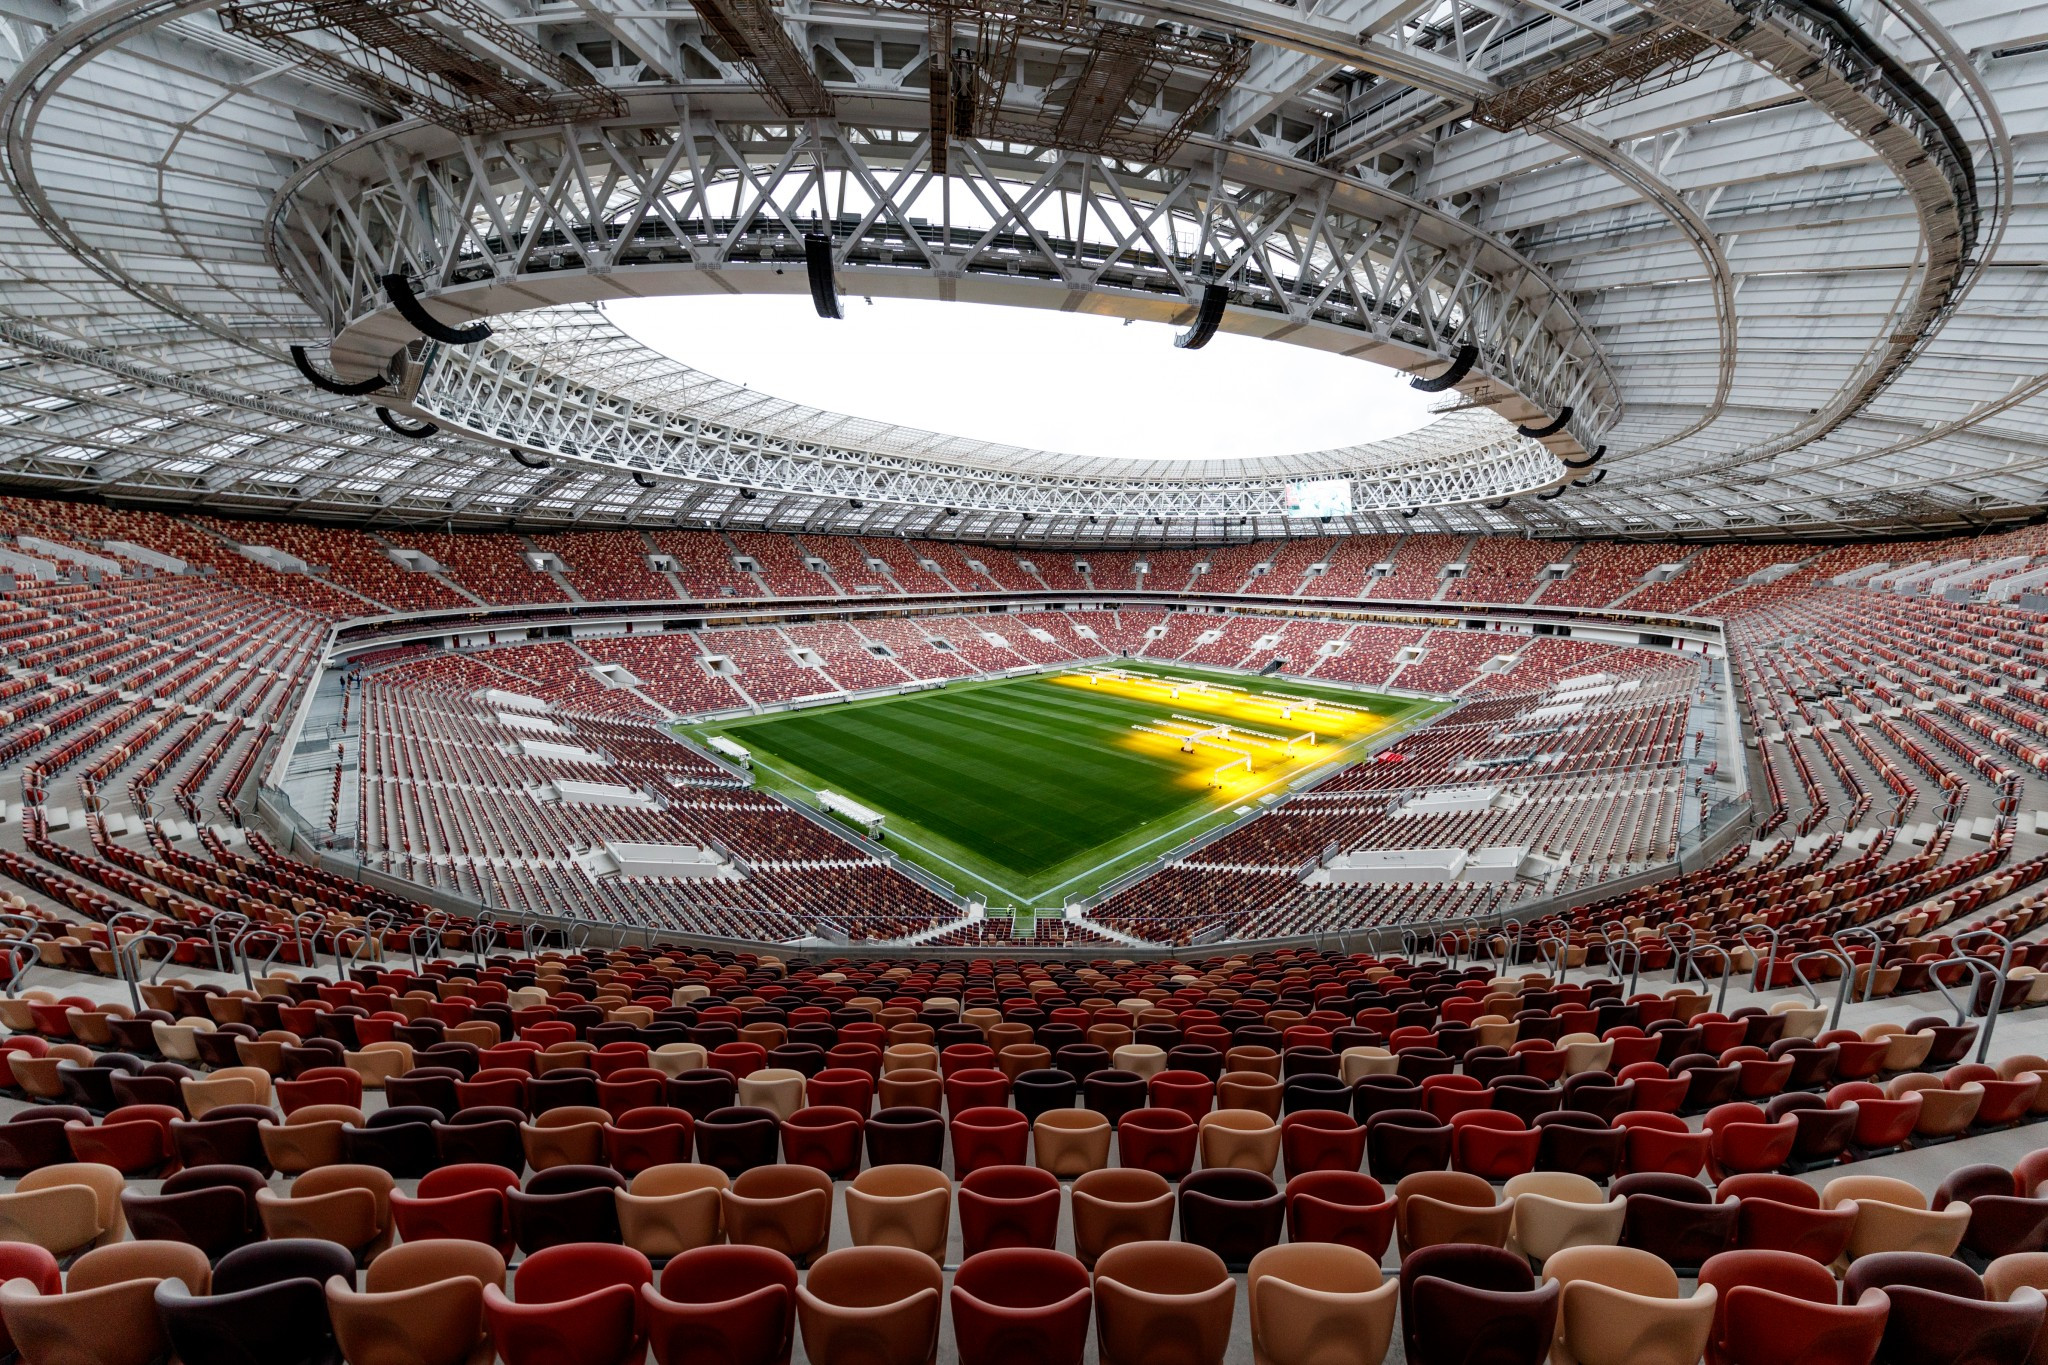 The Luzhniki Stadium will host the 2018 FIFA World Cup final ©Getty Images